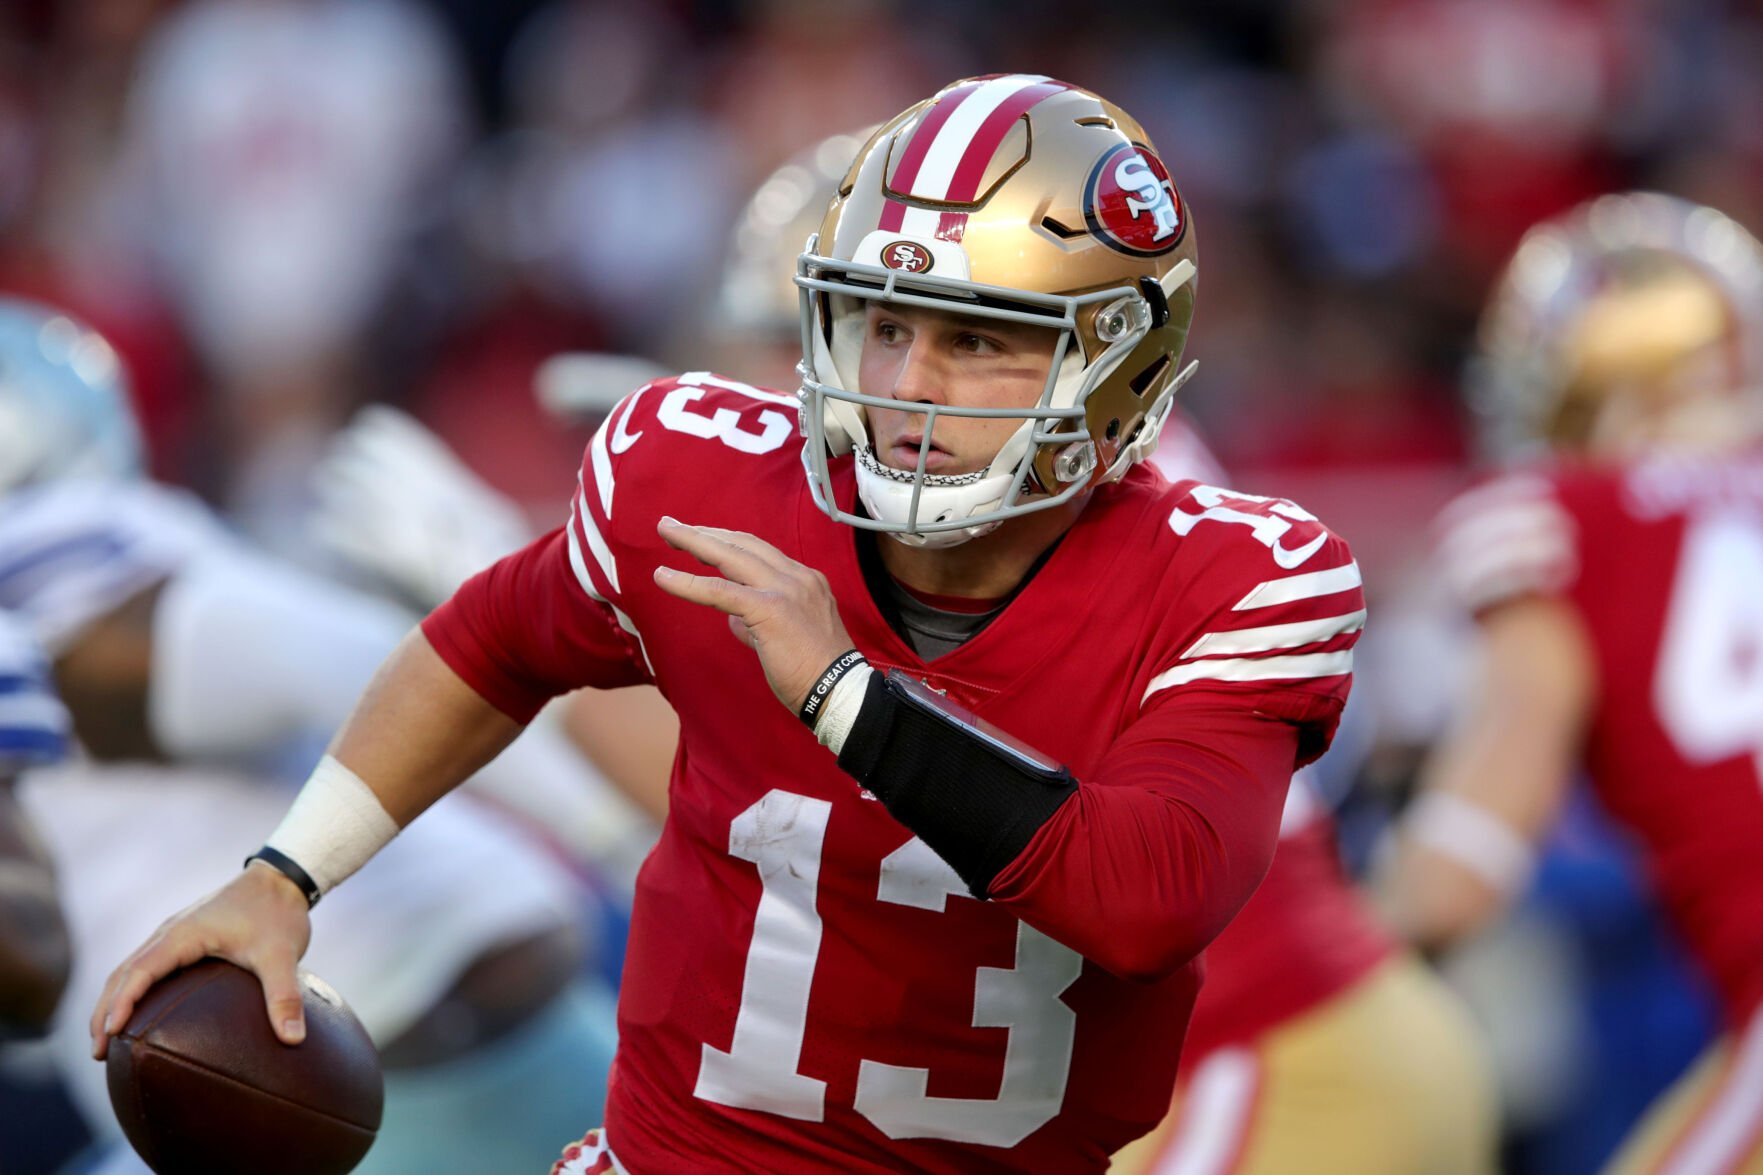 Padecky: Brock Purdy deserves a long look to be 49ers' starting QB